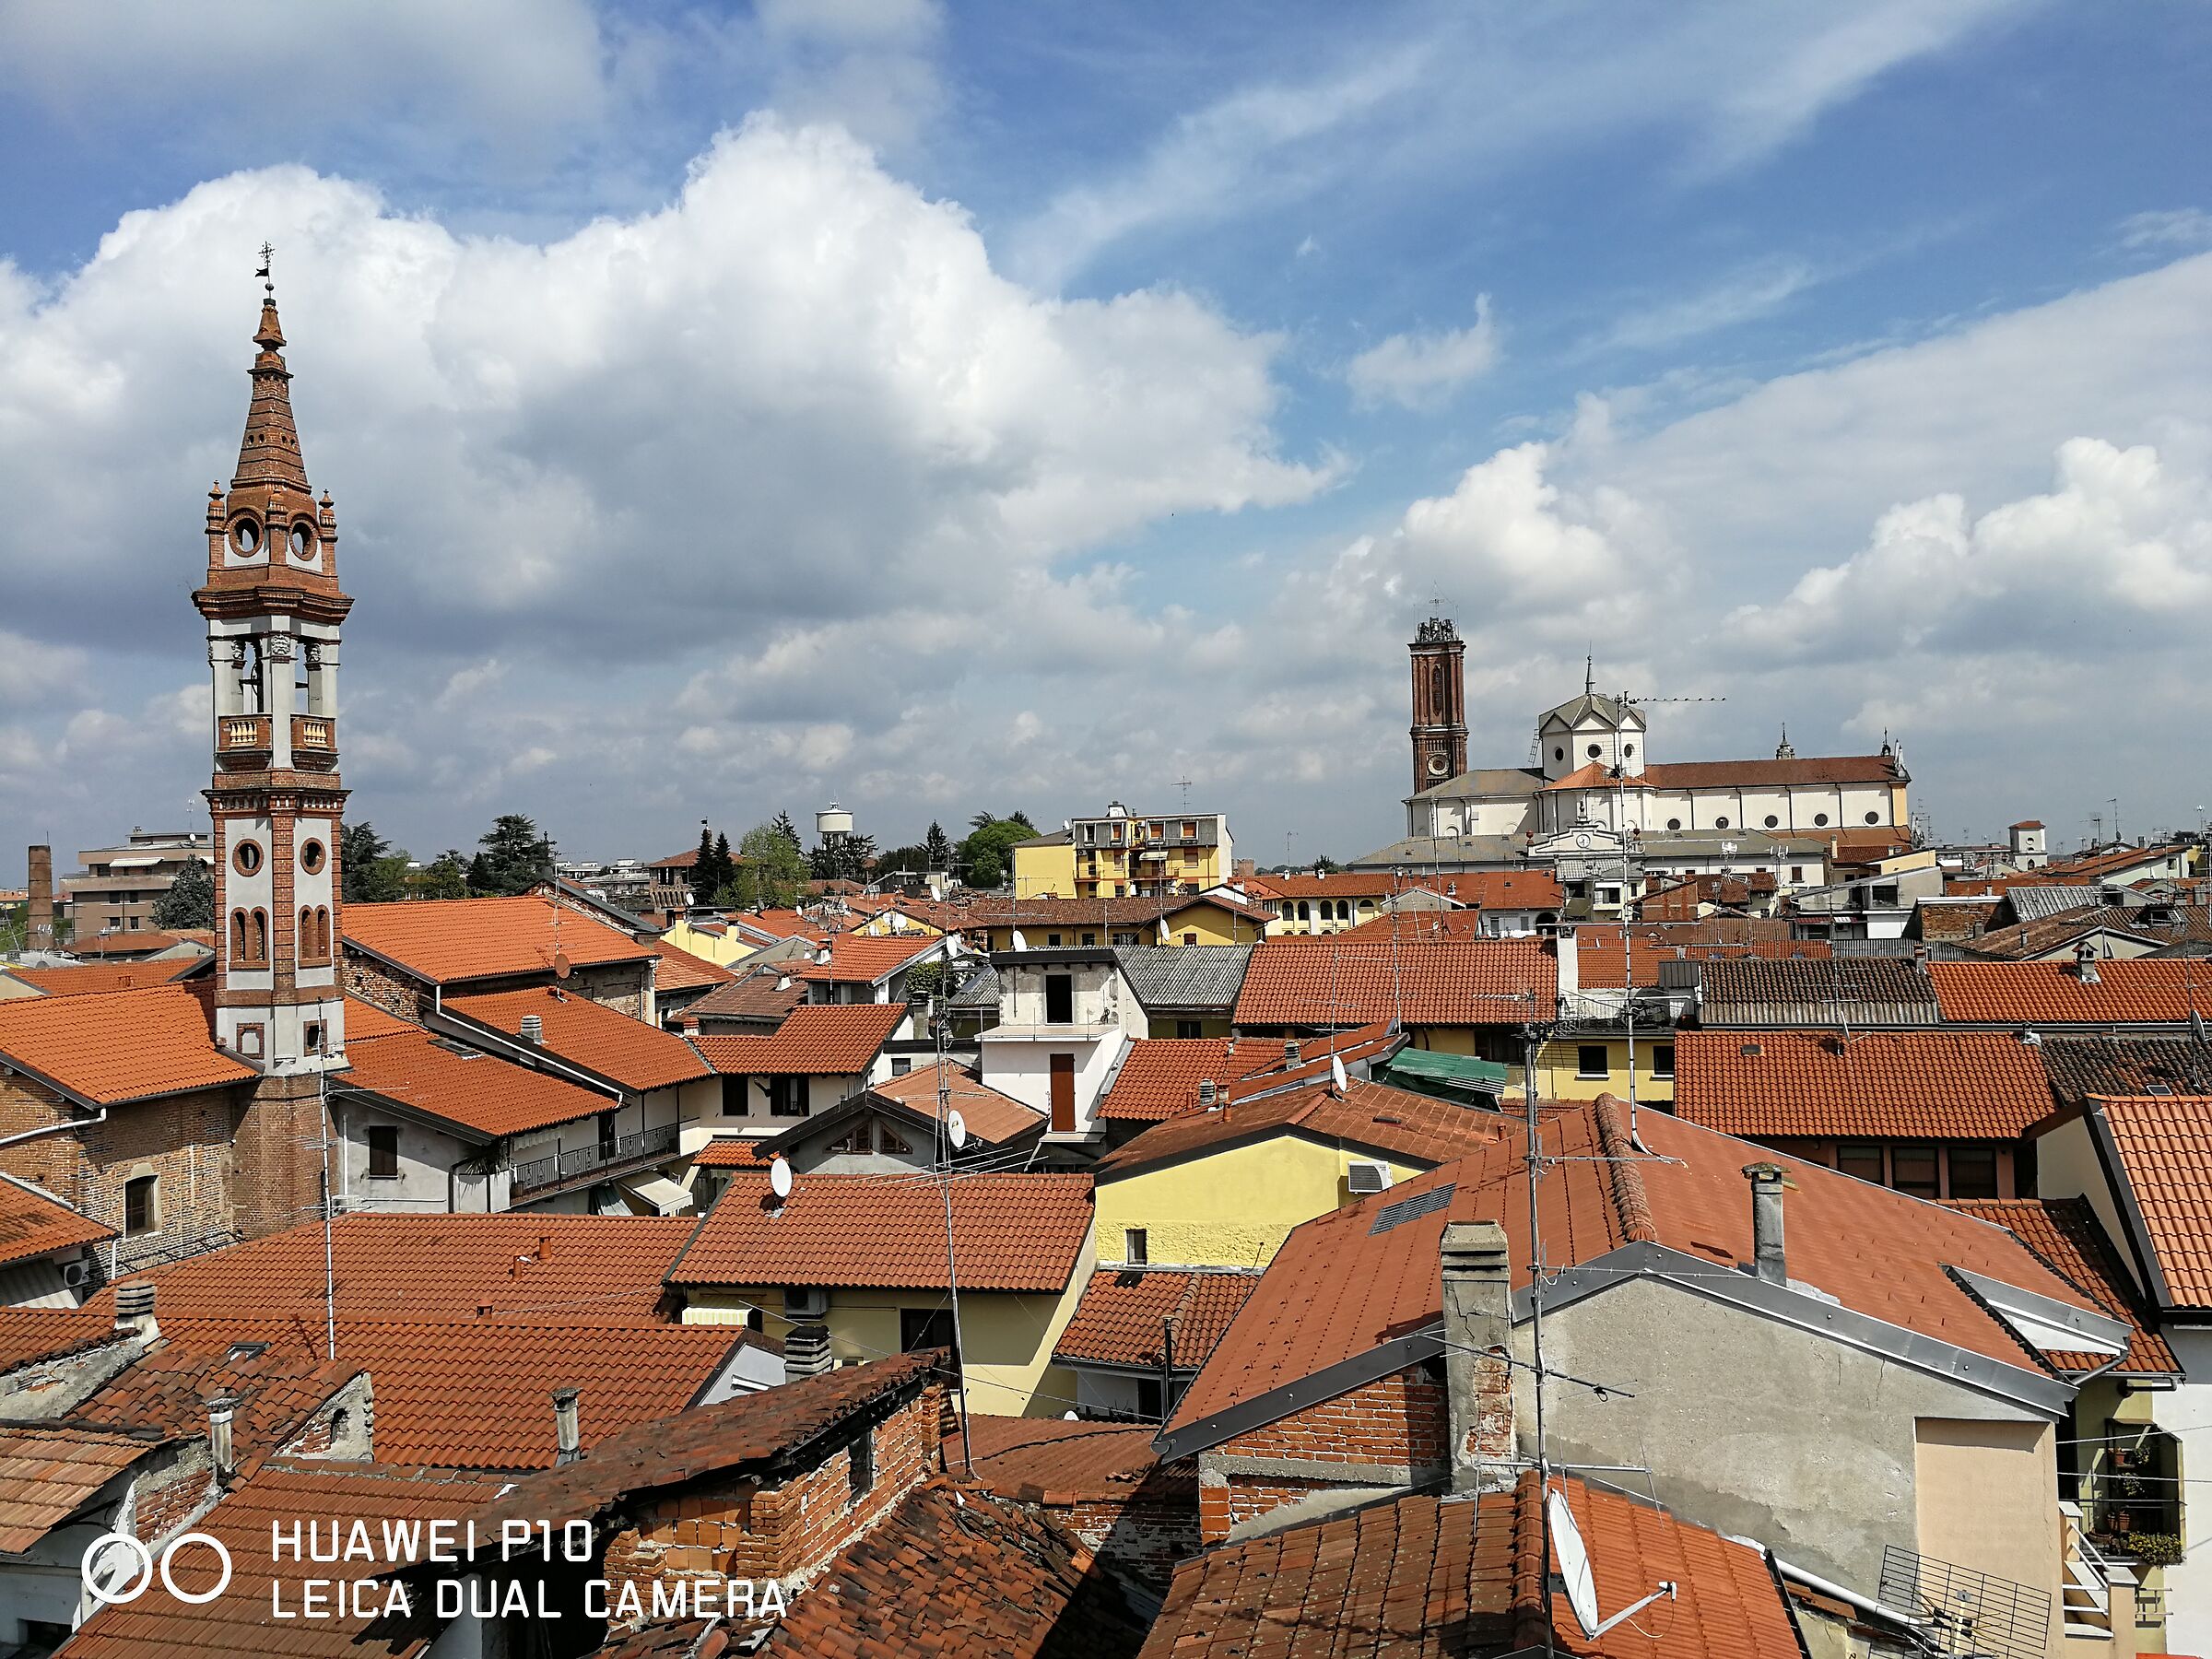 Galliate view from the rooftops....